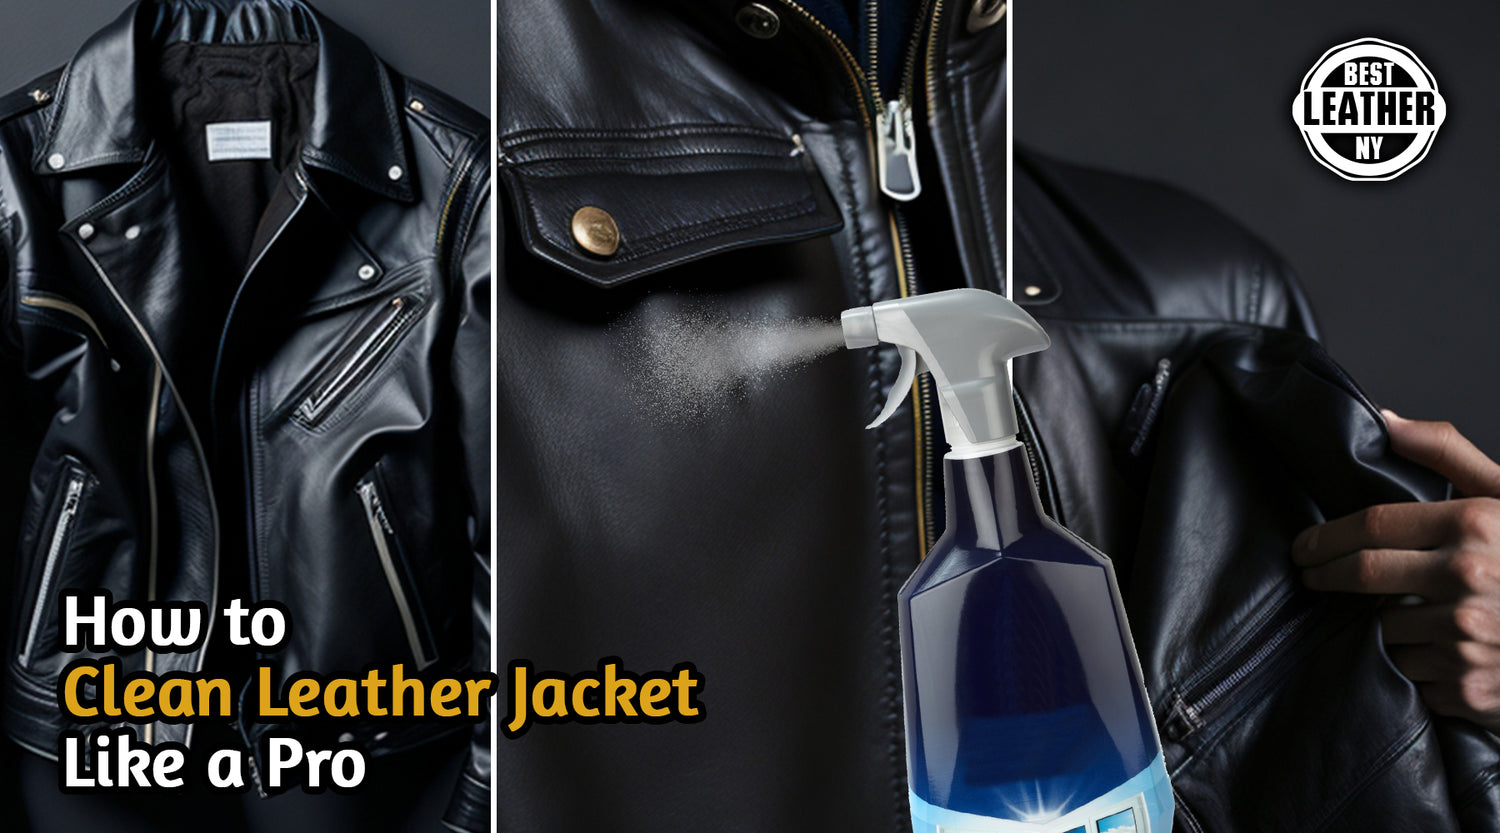 Discover expert tips for cleaning leather jackets like a pro.